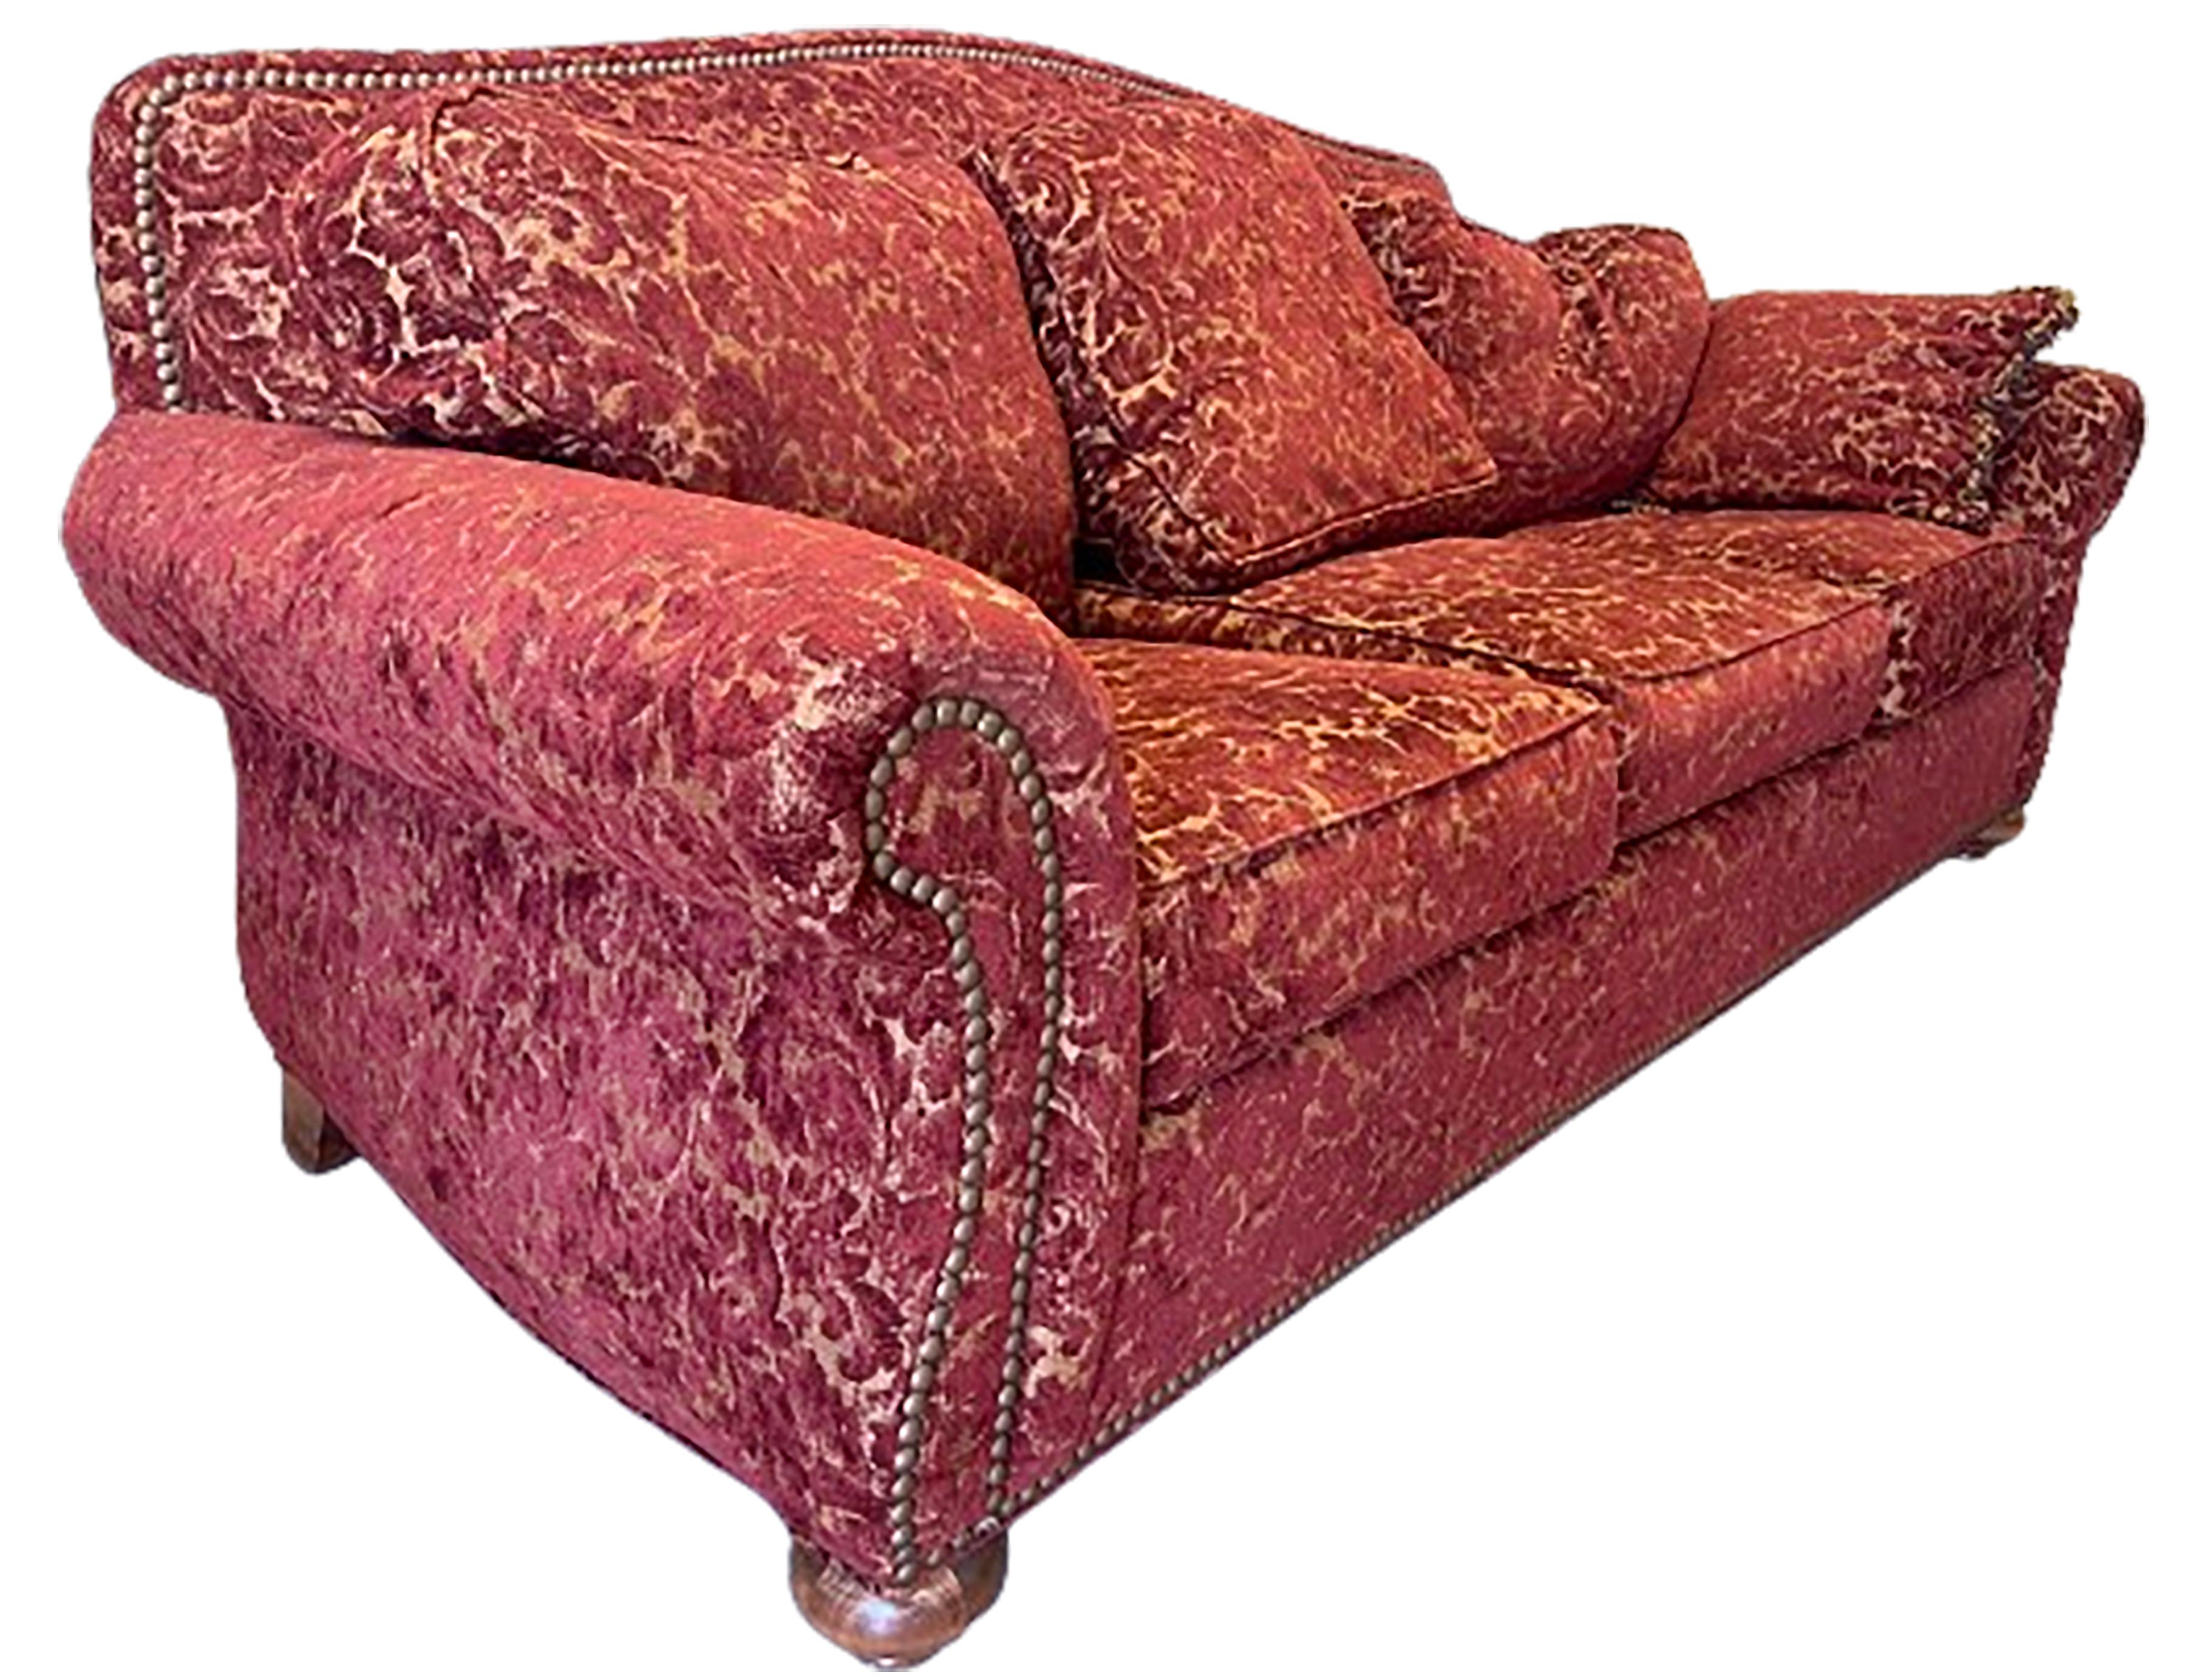 A charming vintage English floral pattern red loveseat with three cushions. Brass tacks line the bottom, back, top, and outer frame of the arms. Angled back for support and comfort.  Upholstered with rich cream and carmine chenille. 

No obvious